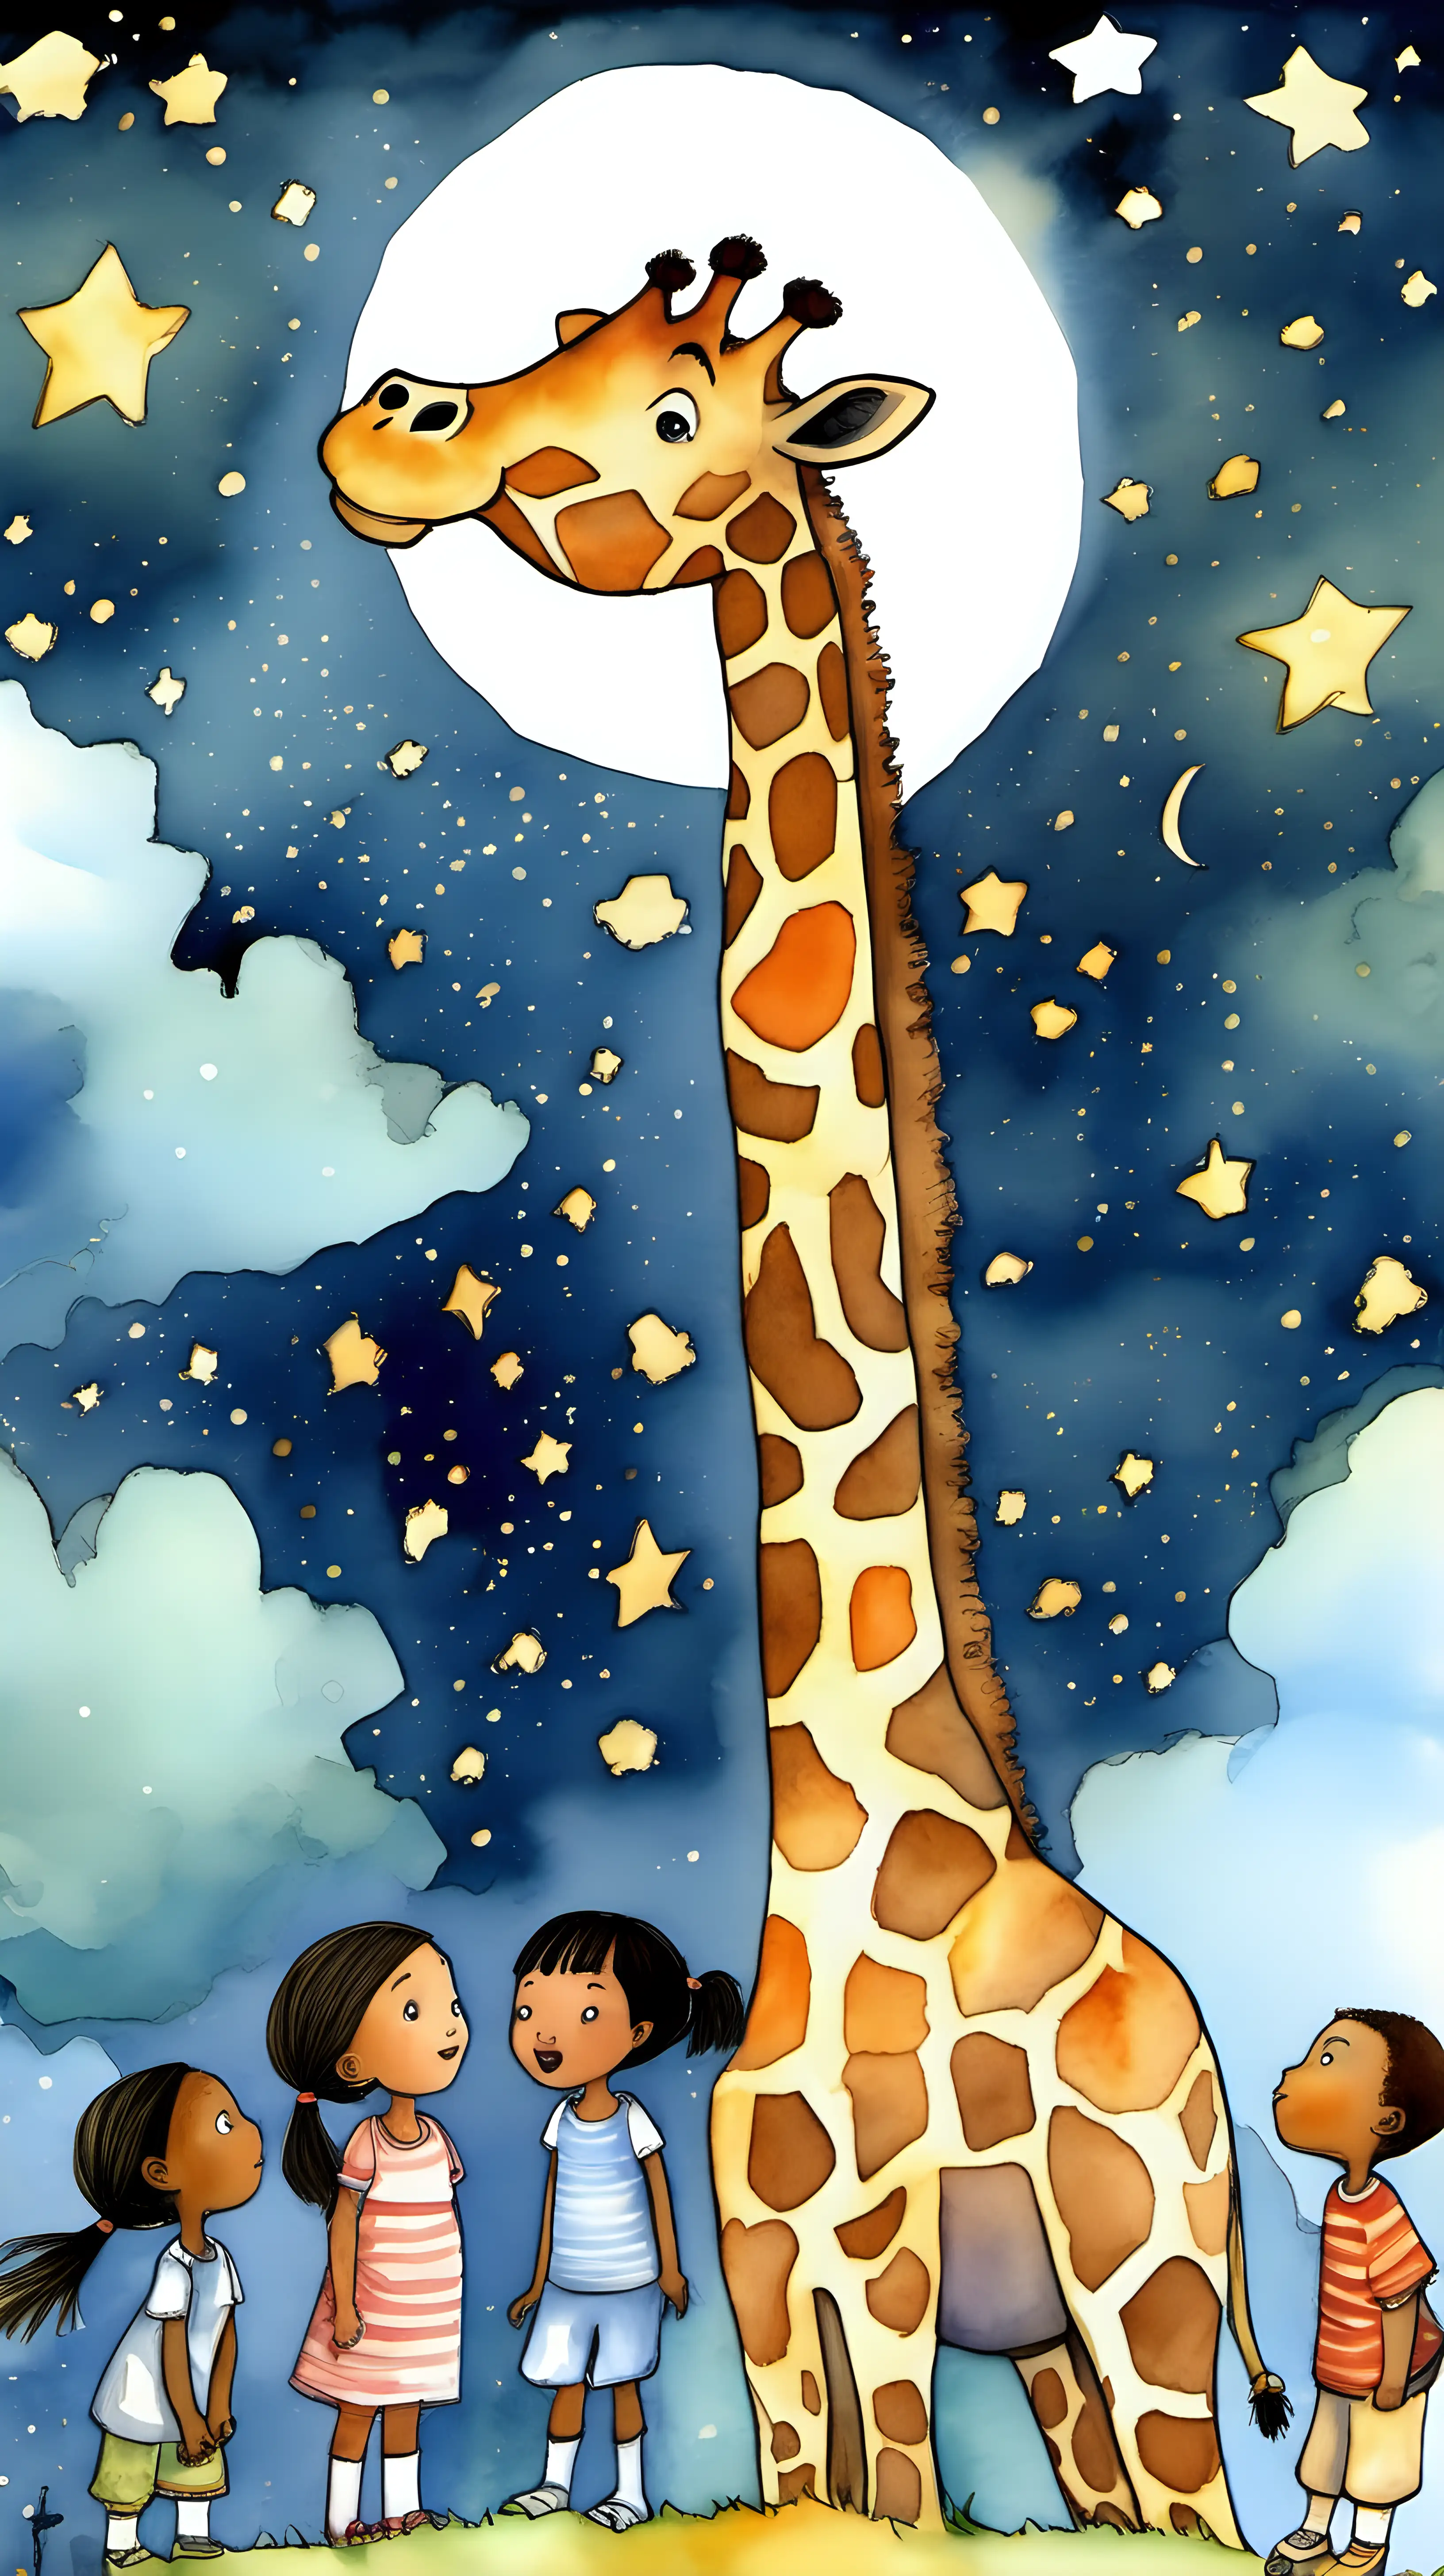 Diverse Children Entranced by Stella the StarFlying Giraffe in a Whimsical Night Town